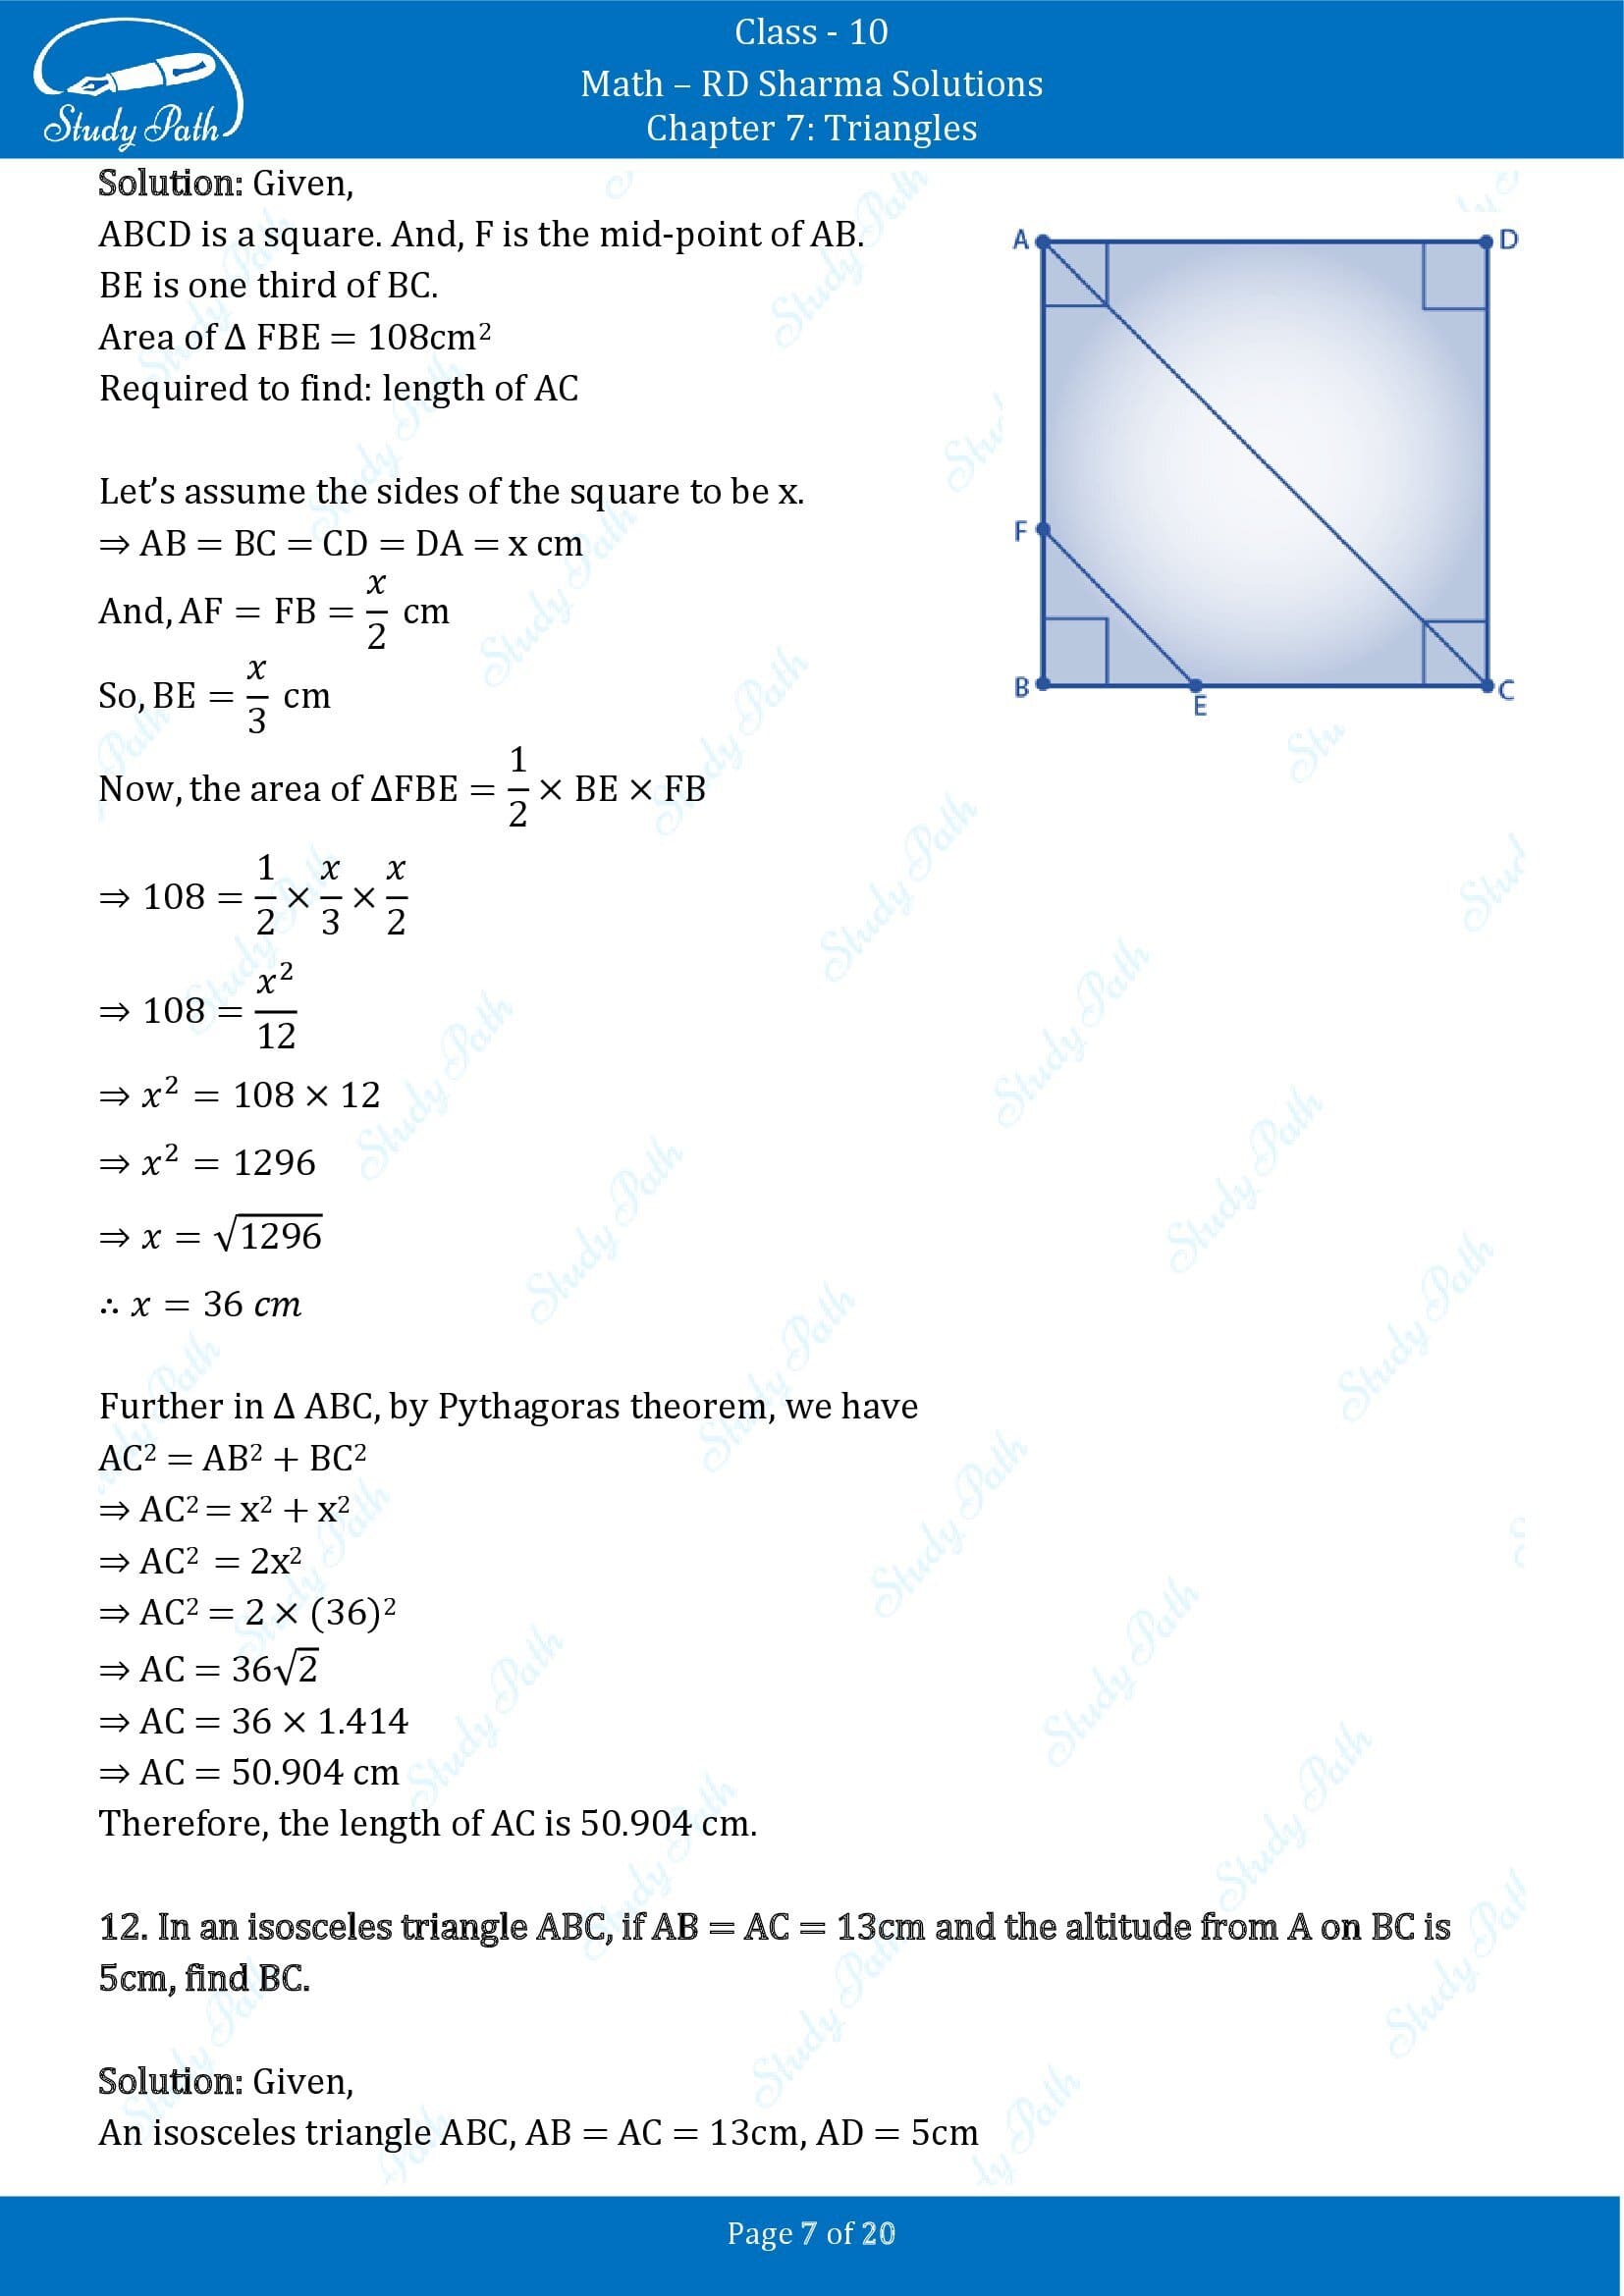 RD Sharma Solutions Class 10 Chapter 7 Triangles Exercise 7.7 00007